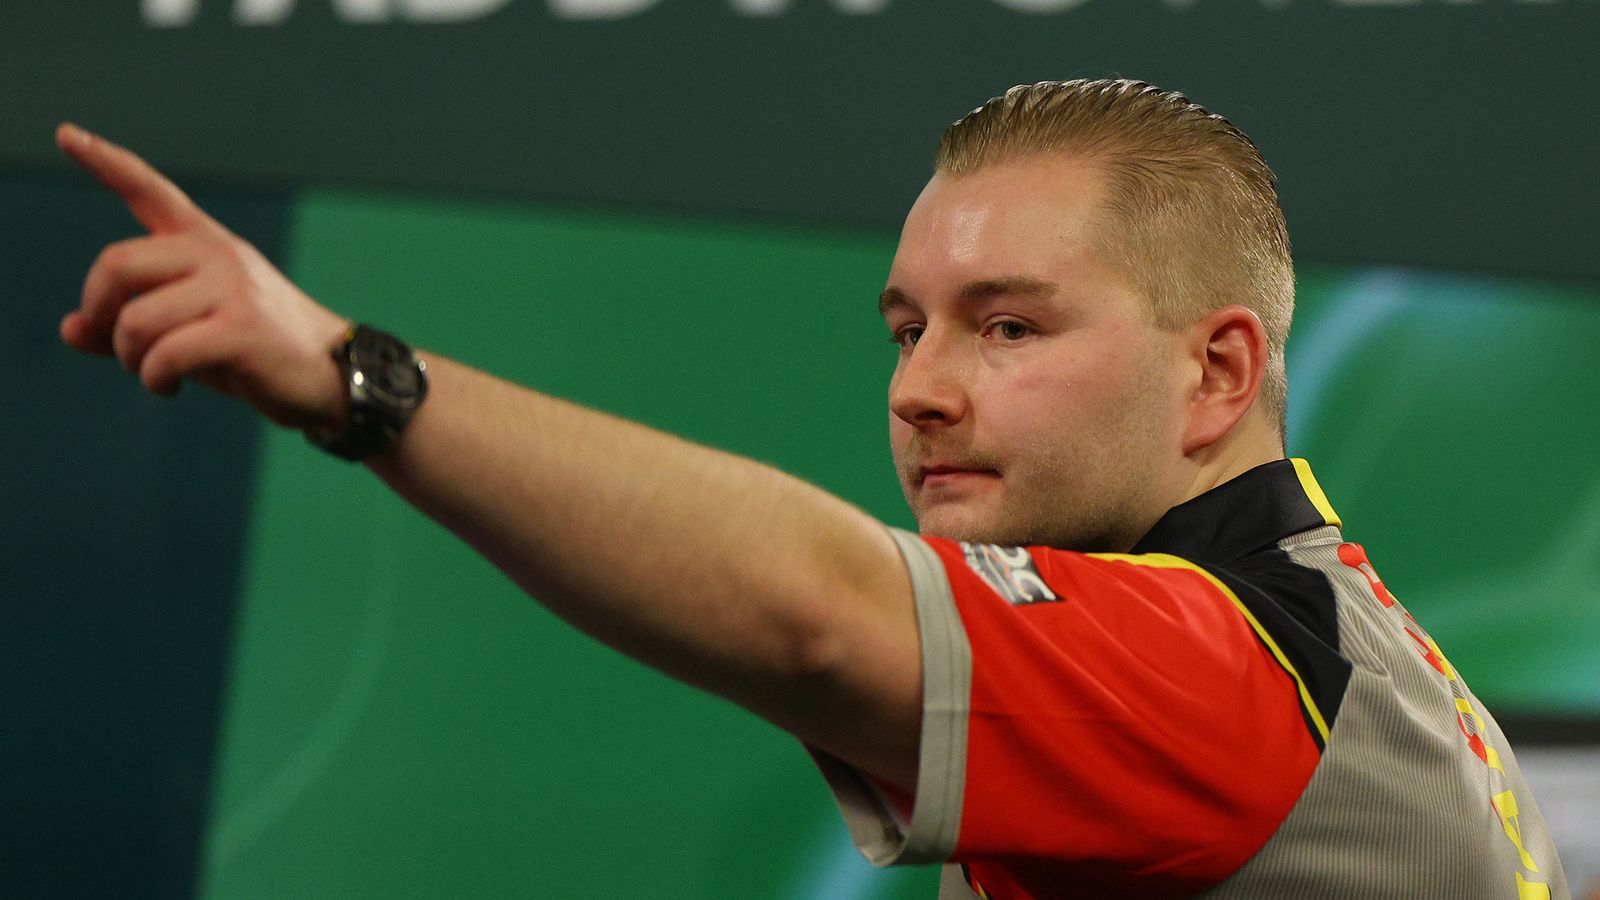 Dimitri Van den Bergh defends pace of play after crowd boos at UK Open ...